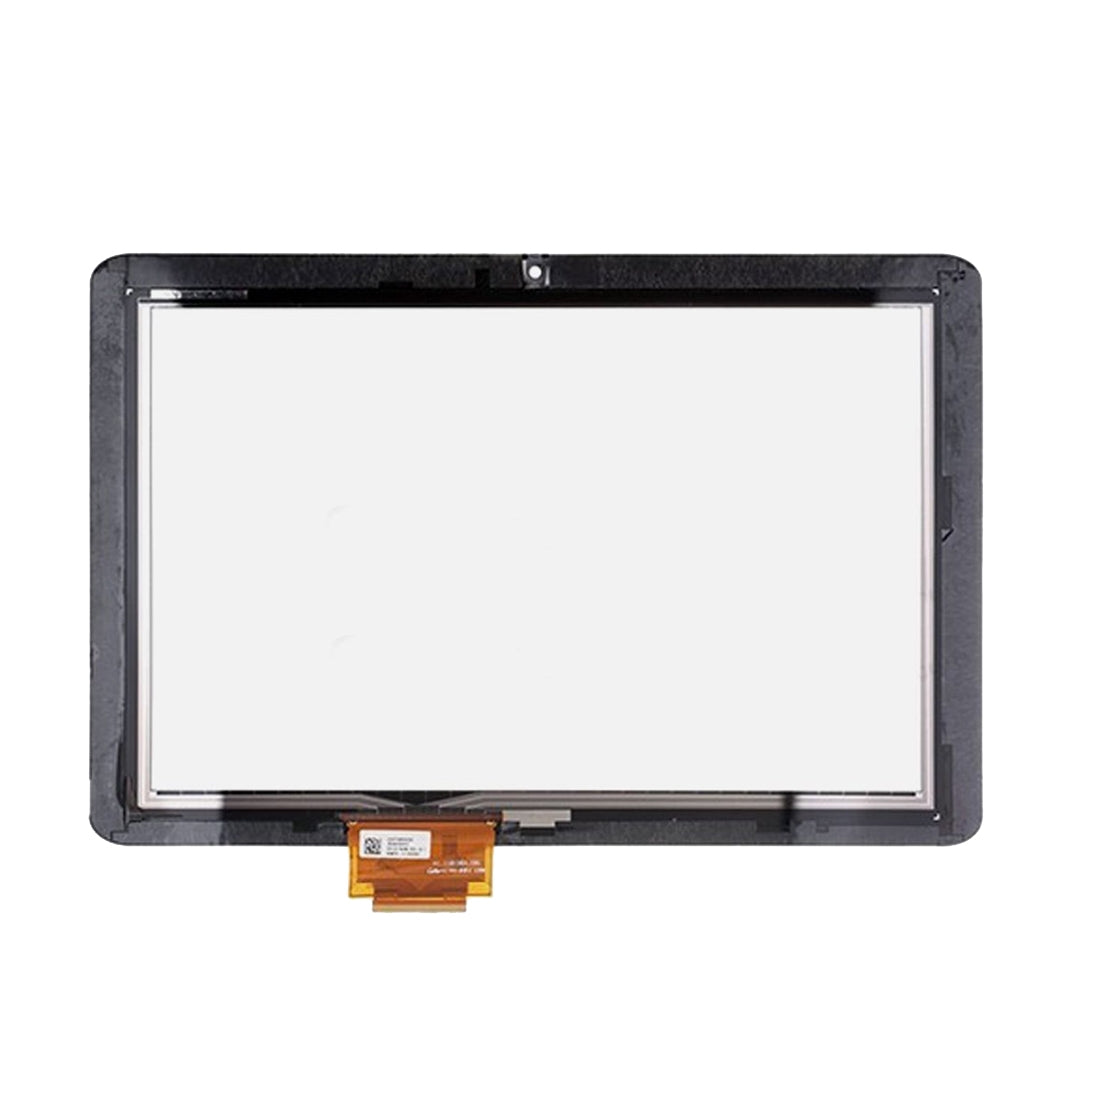 Touch Screen Digitizer Acer Iconia Tab A200 Black